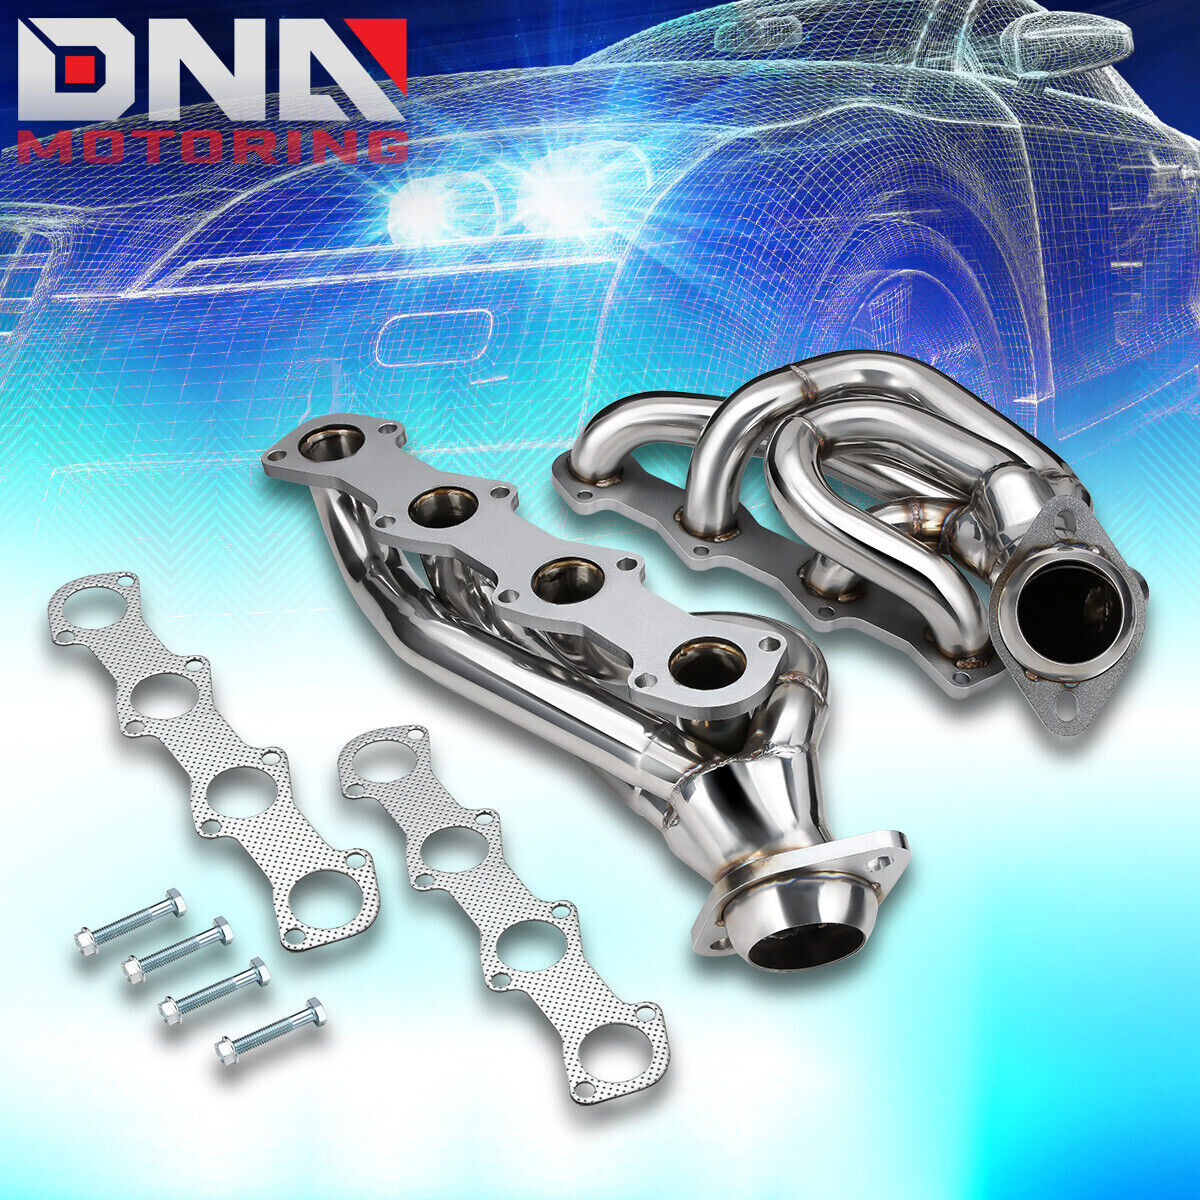 STAINLESS STEEL HEADER FOR 97-03 F150/F250/EXPEDITION 5.4L 8CYL EXHAUST/MANIFOLD